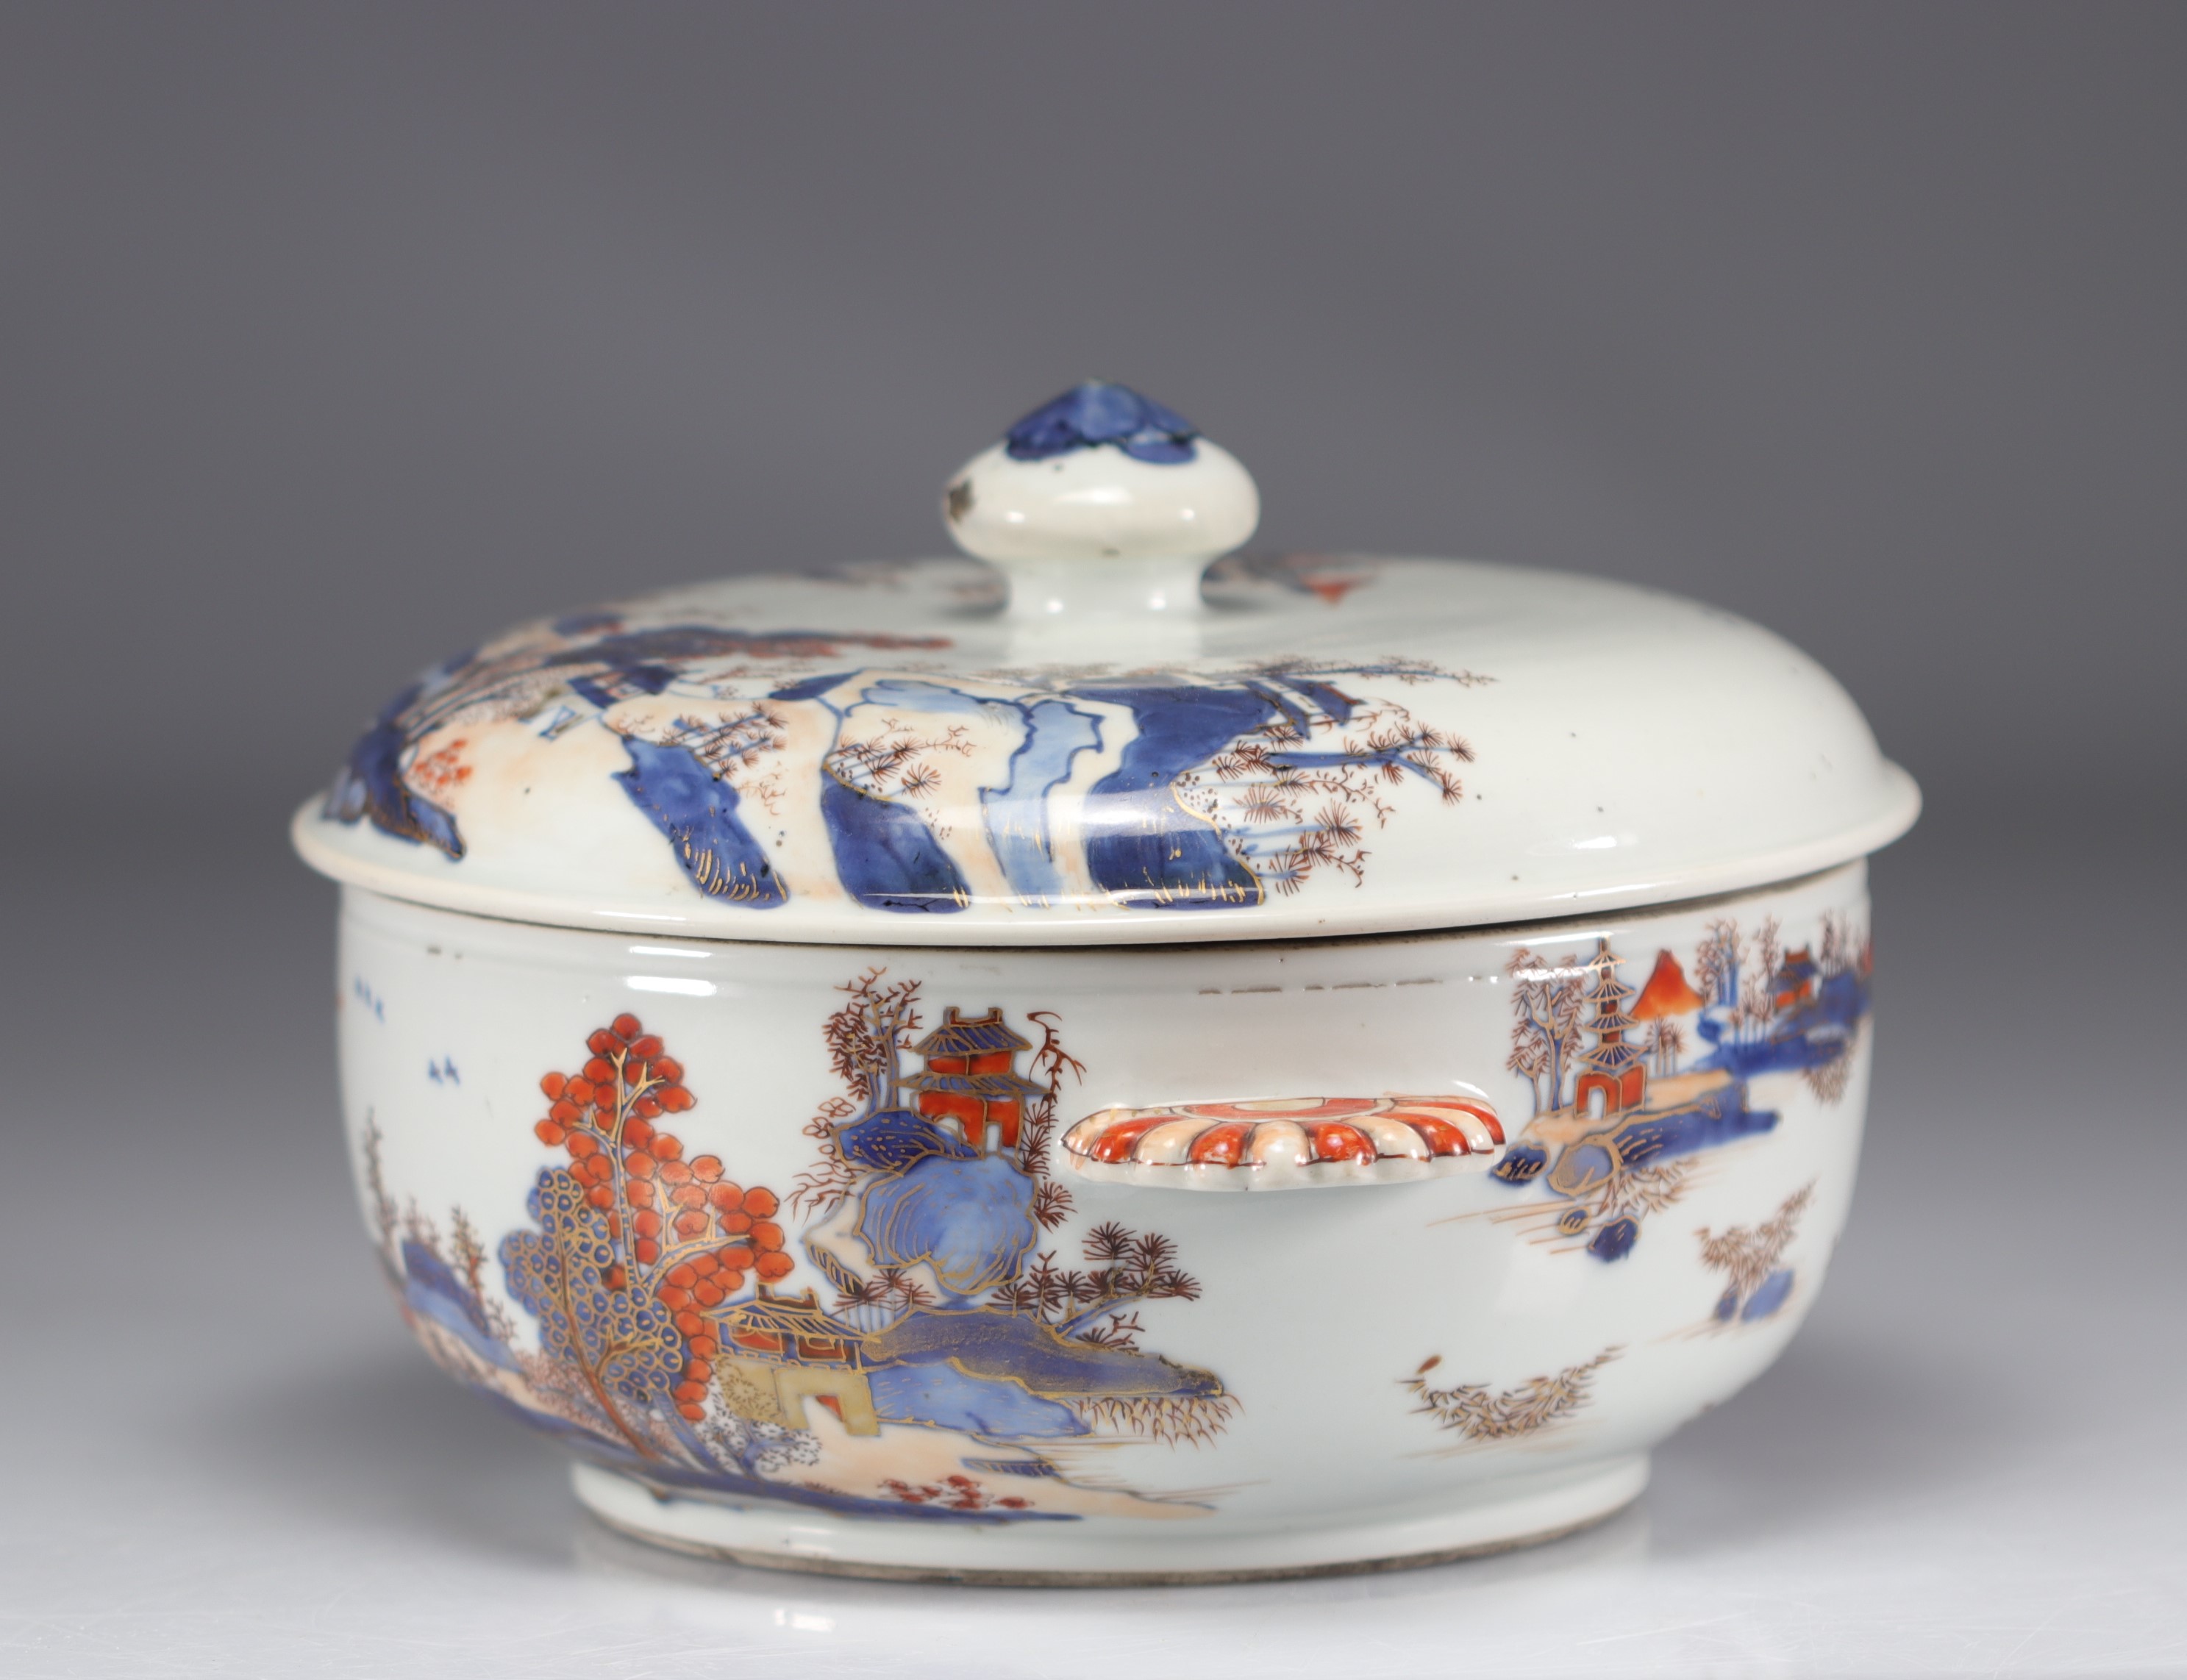 Covered dish in chinese porcelain decorated with landscapes on a white background from 18th century - Image 3 of 6